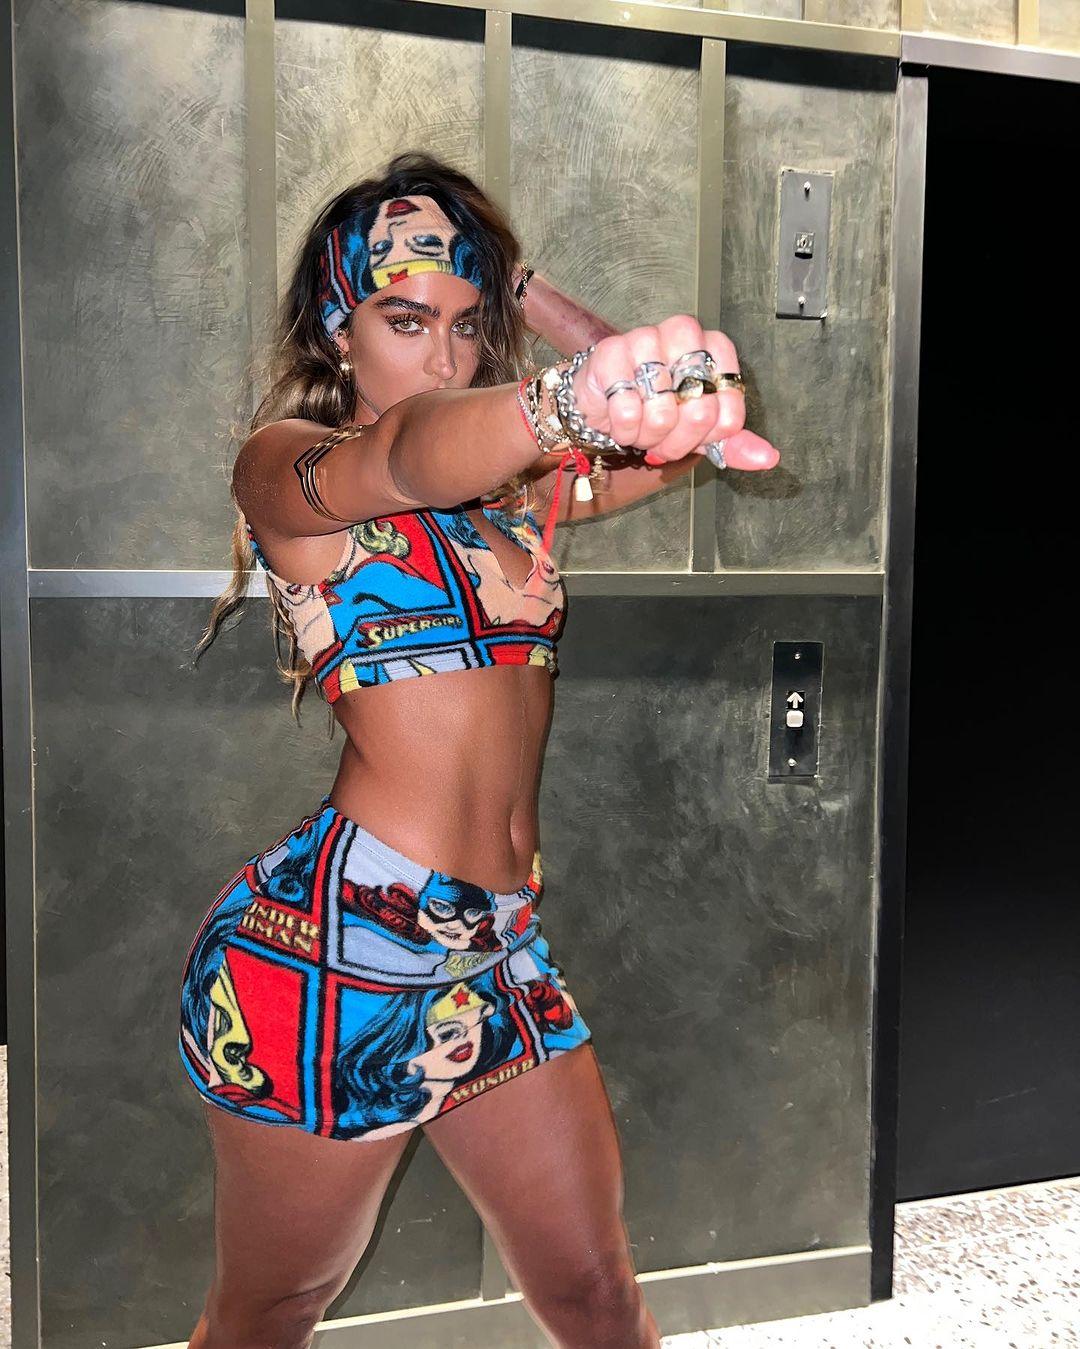 Sommer Ray wears a tiny crop top and skirt with a Wonder Woman print.